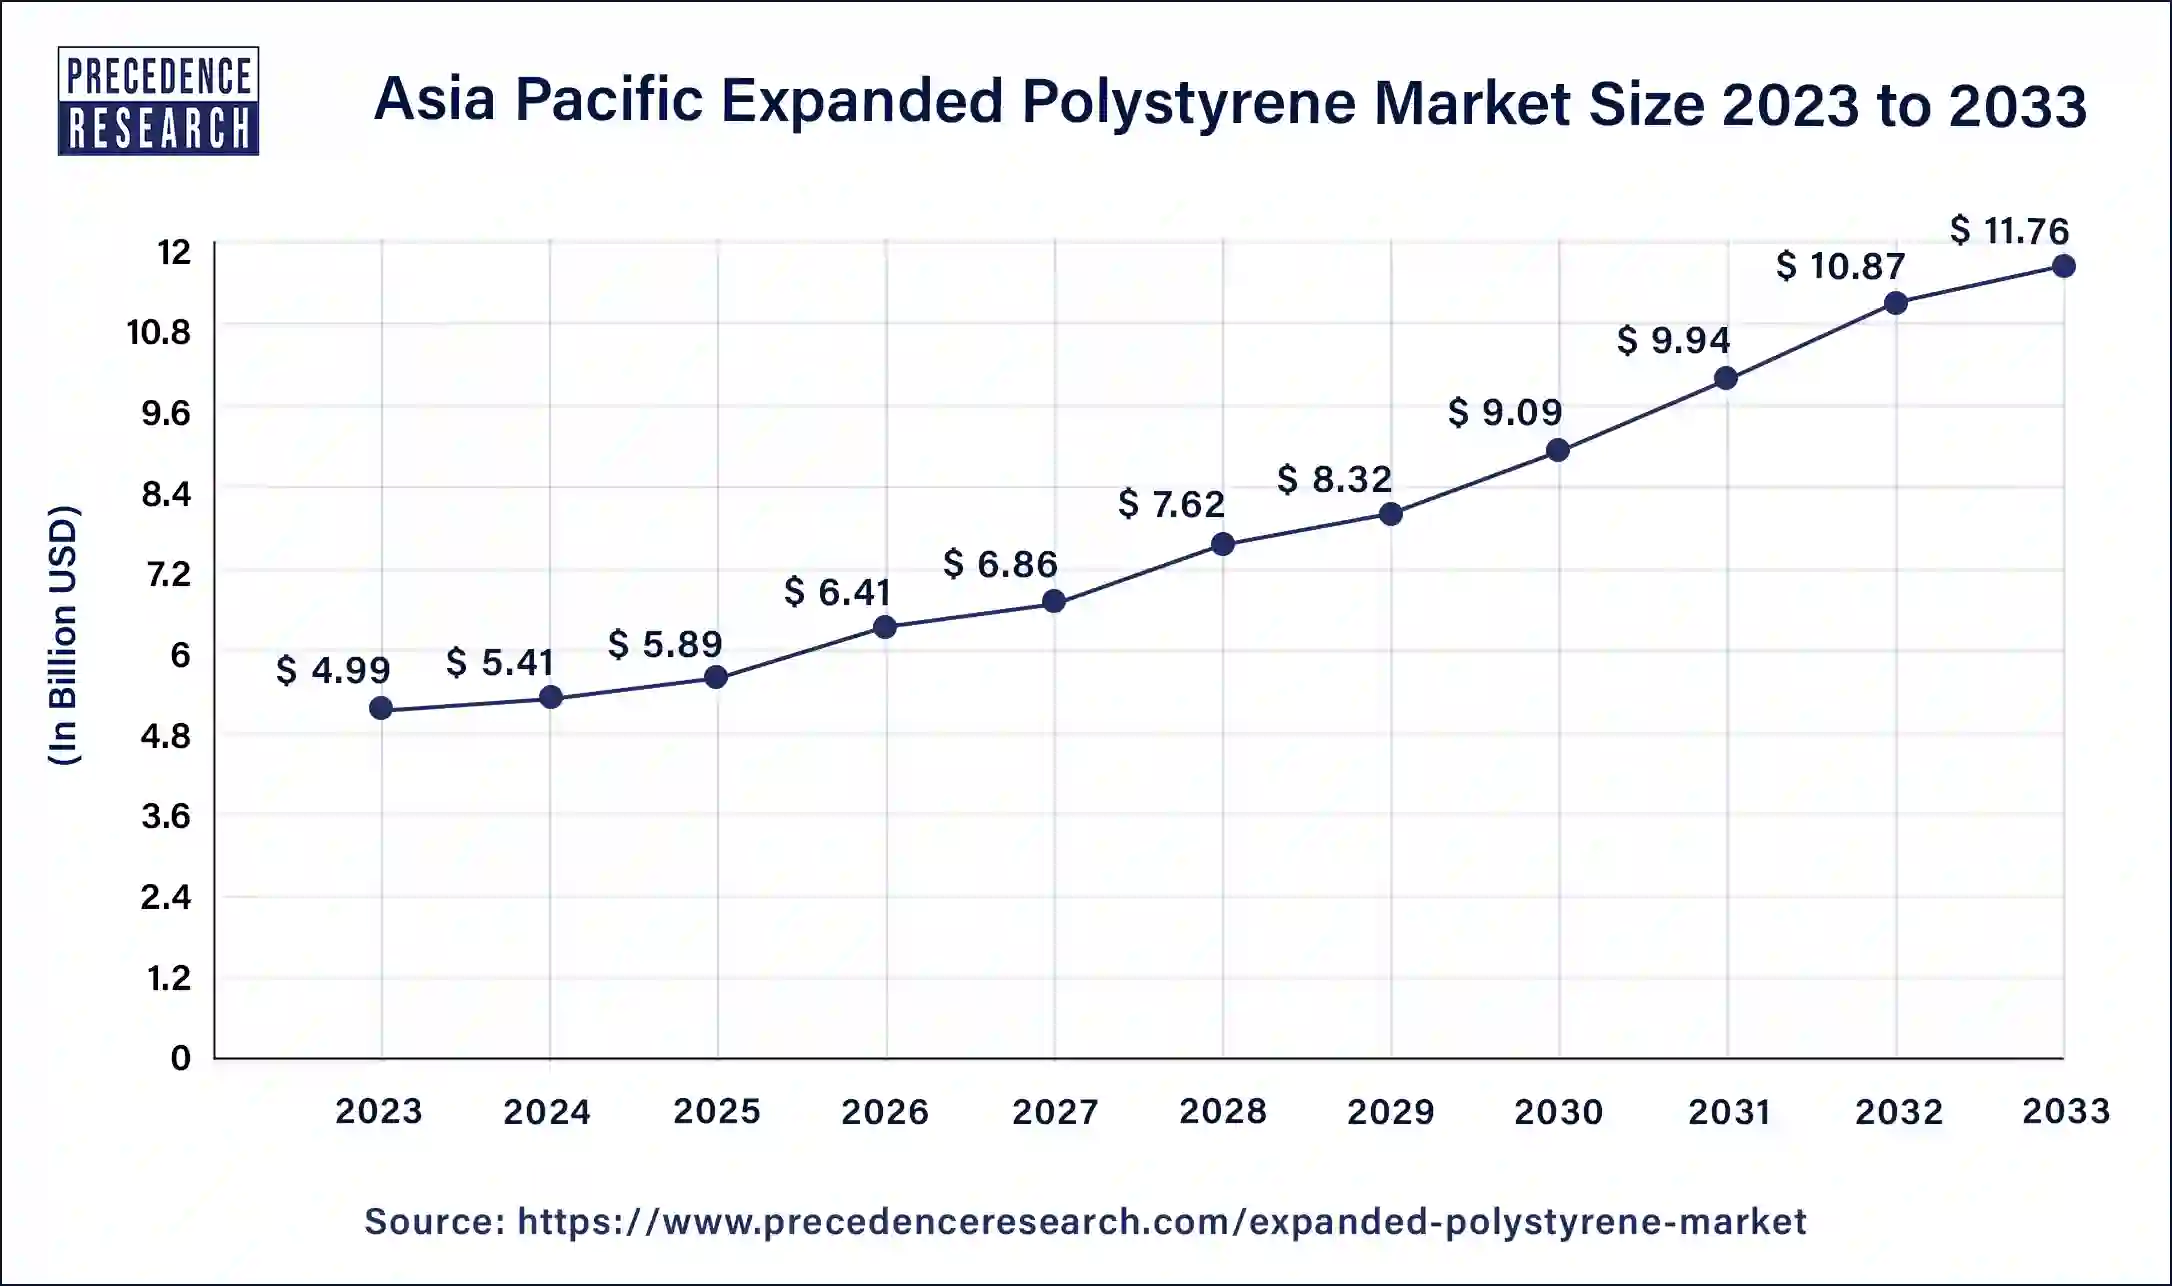 Asia Pacific Expanded Polystyrene Market Size 2024 to 2033